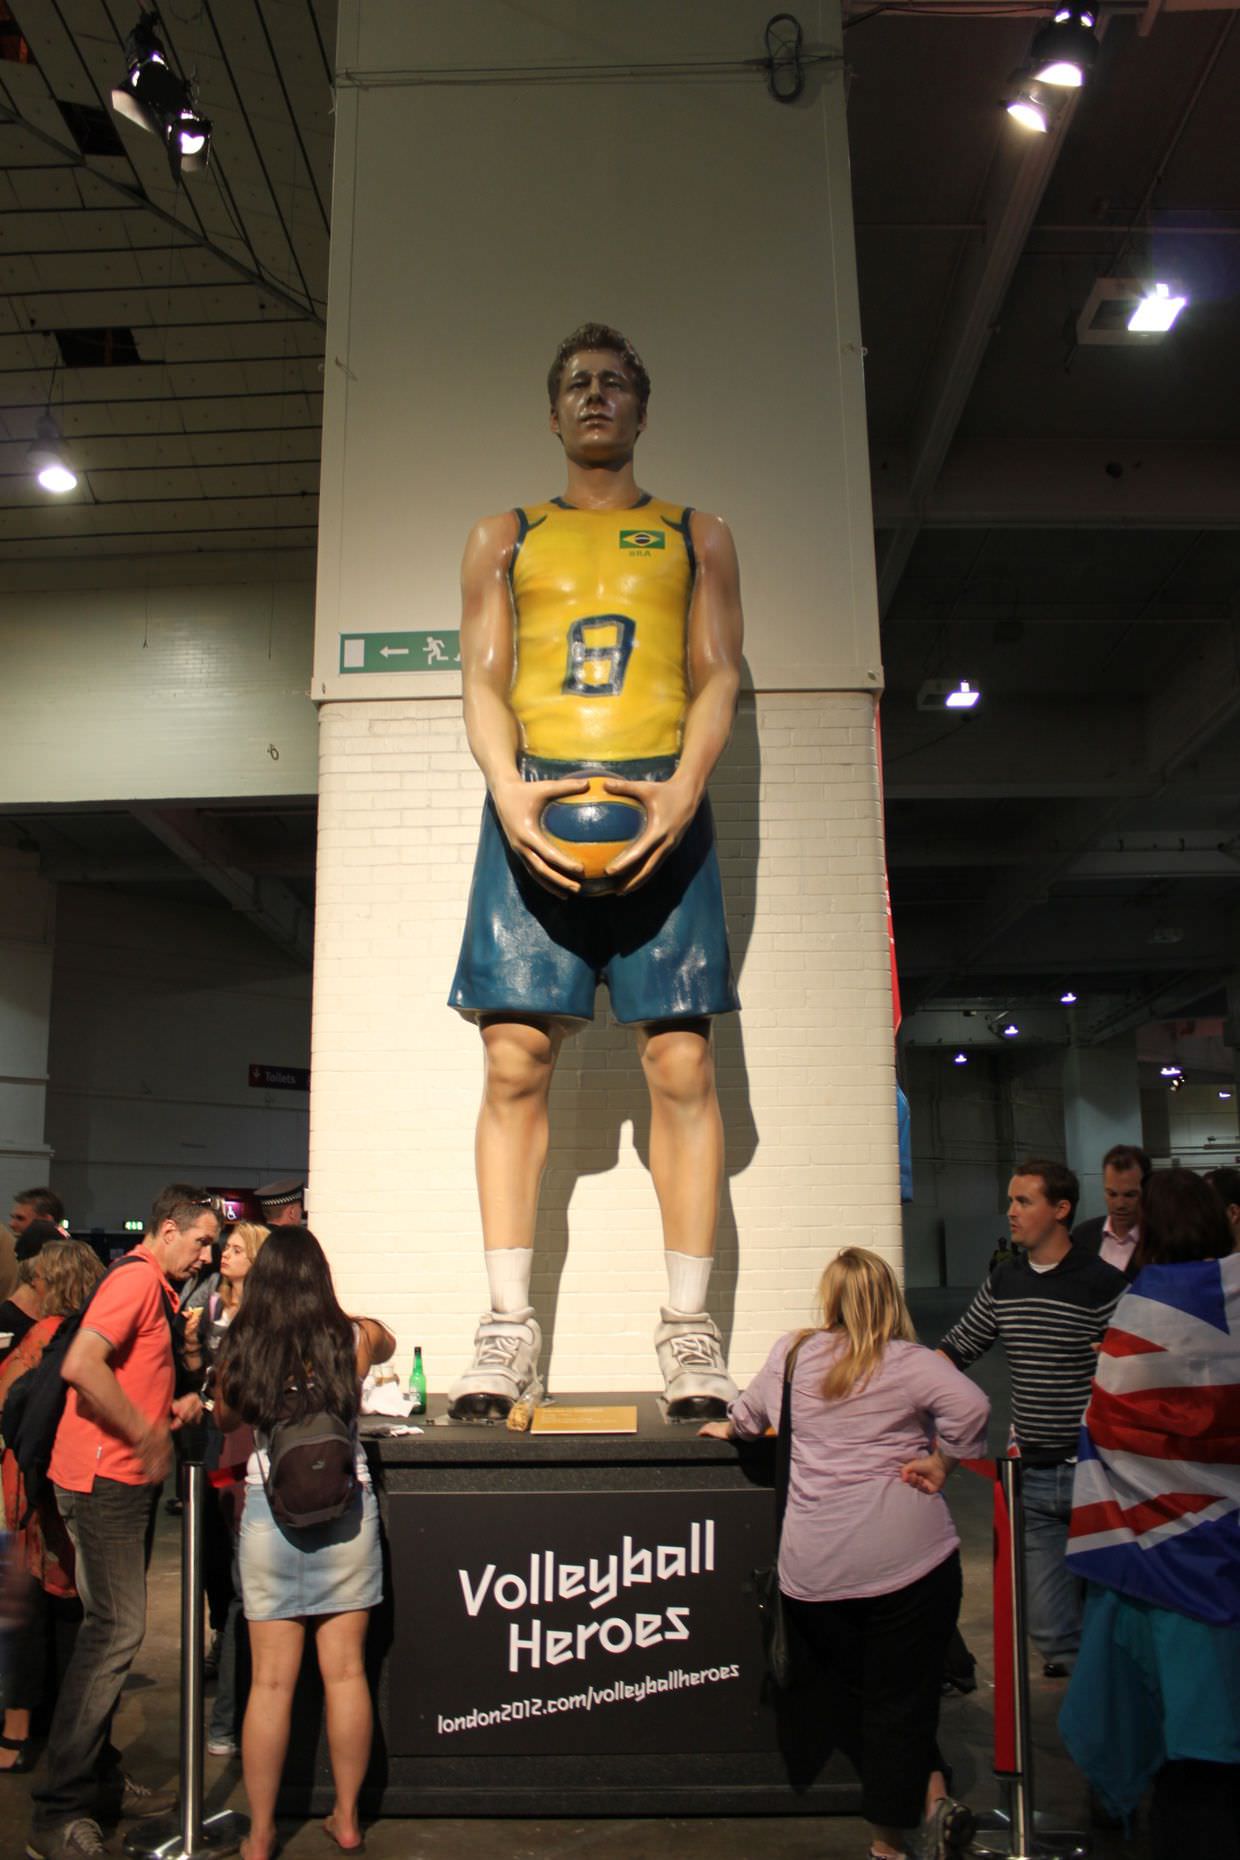 Volleyball heroes statue